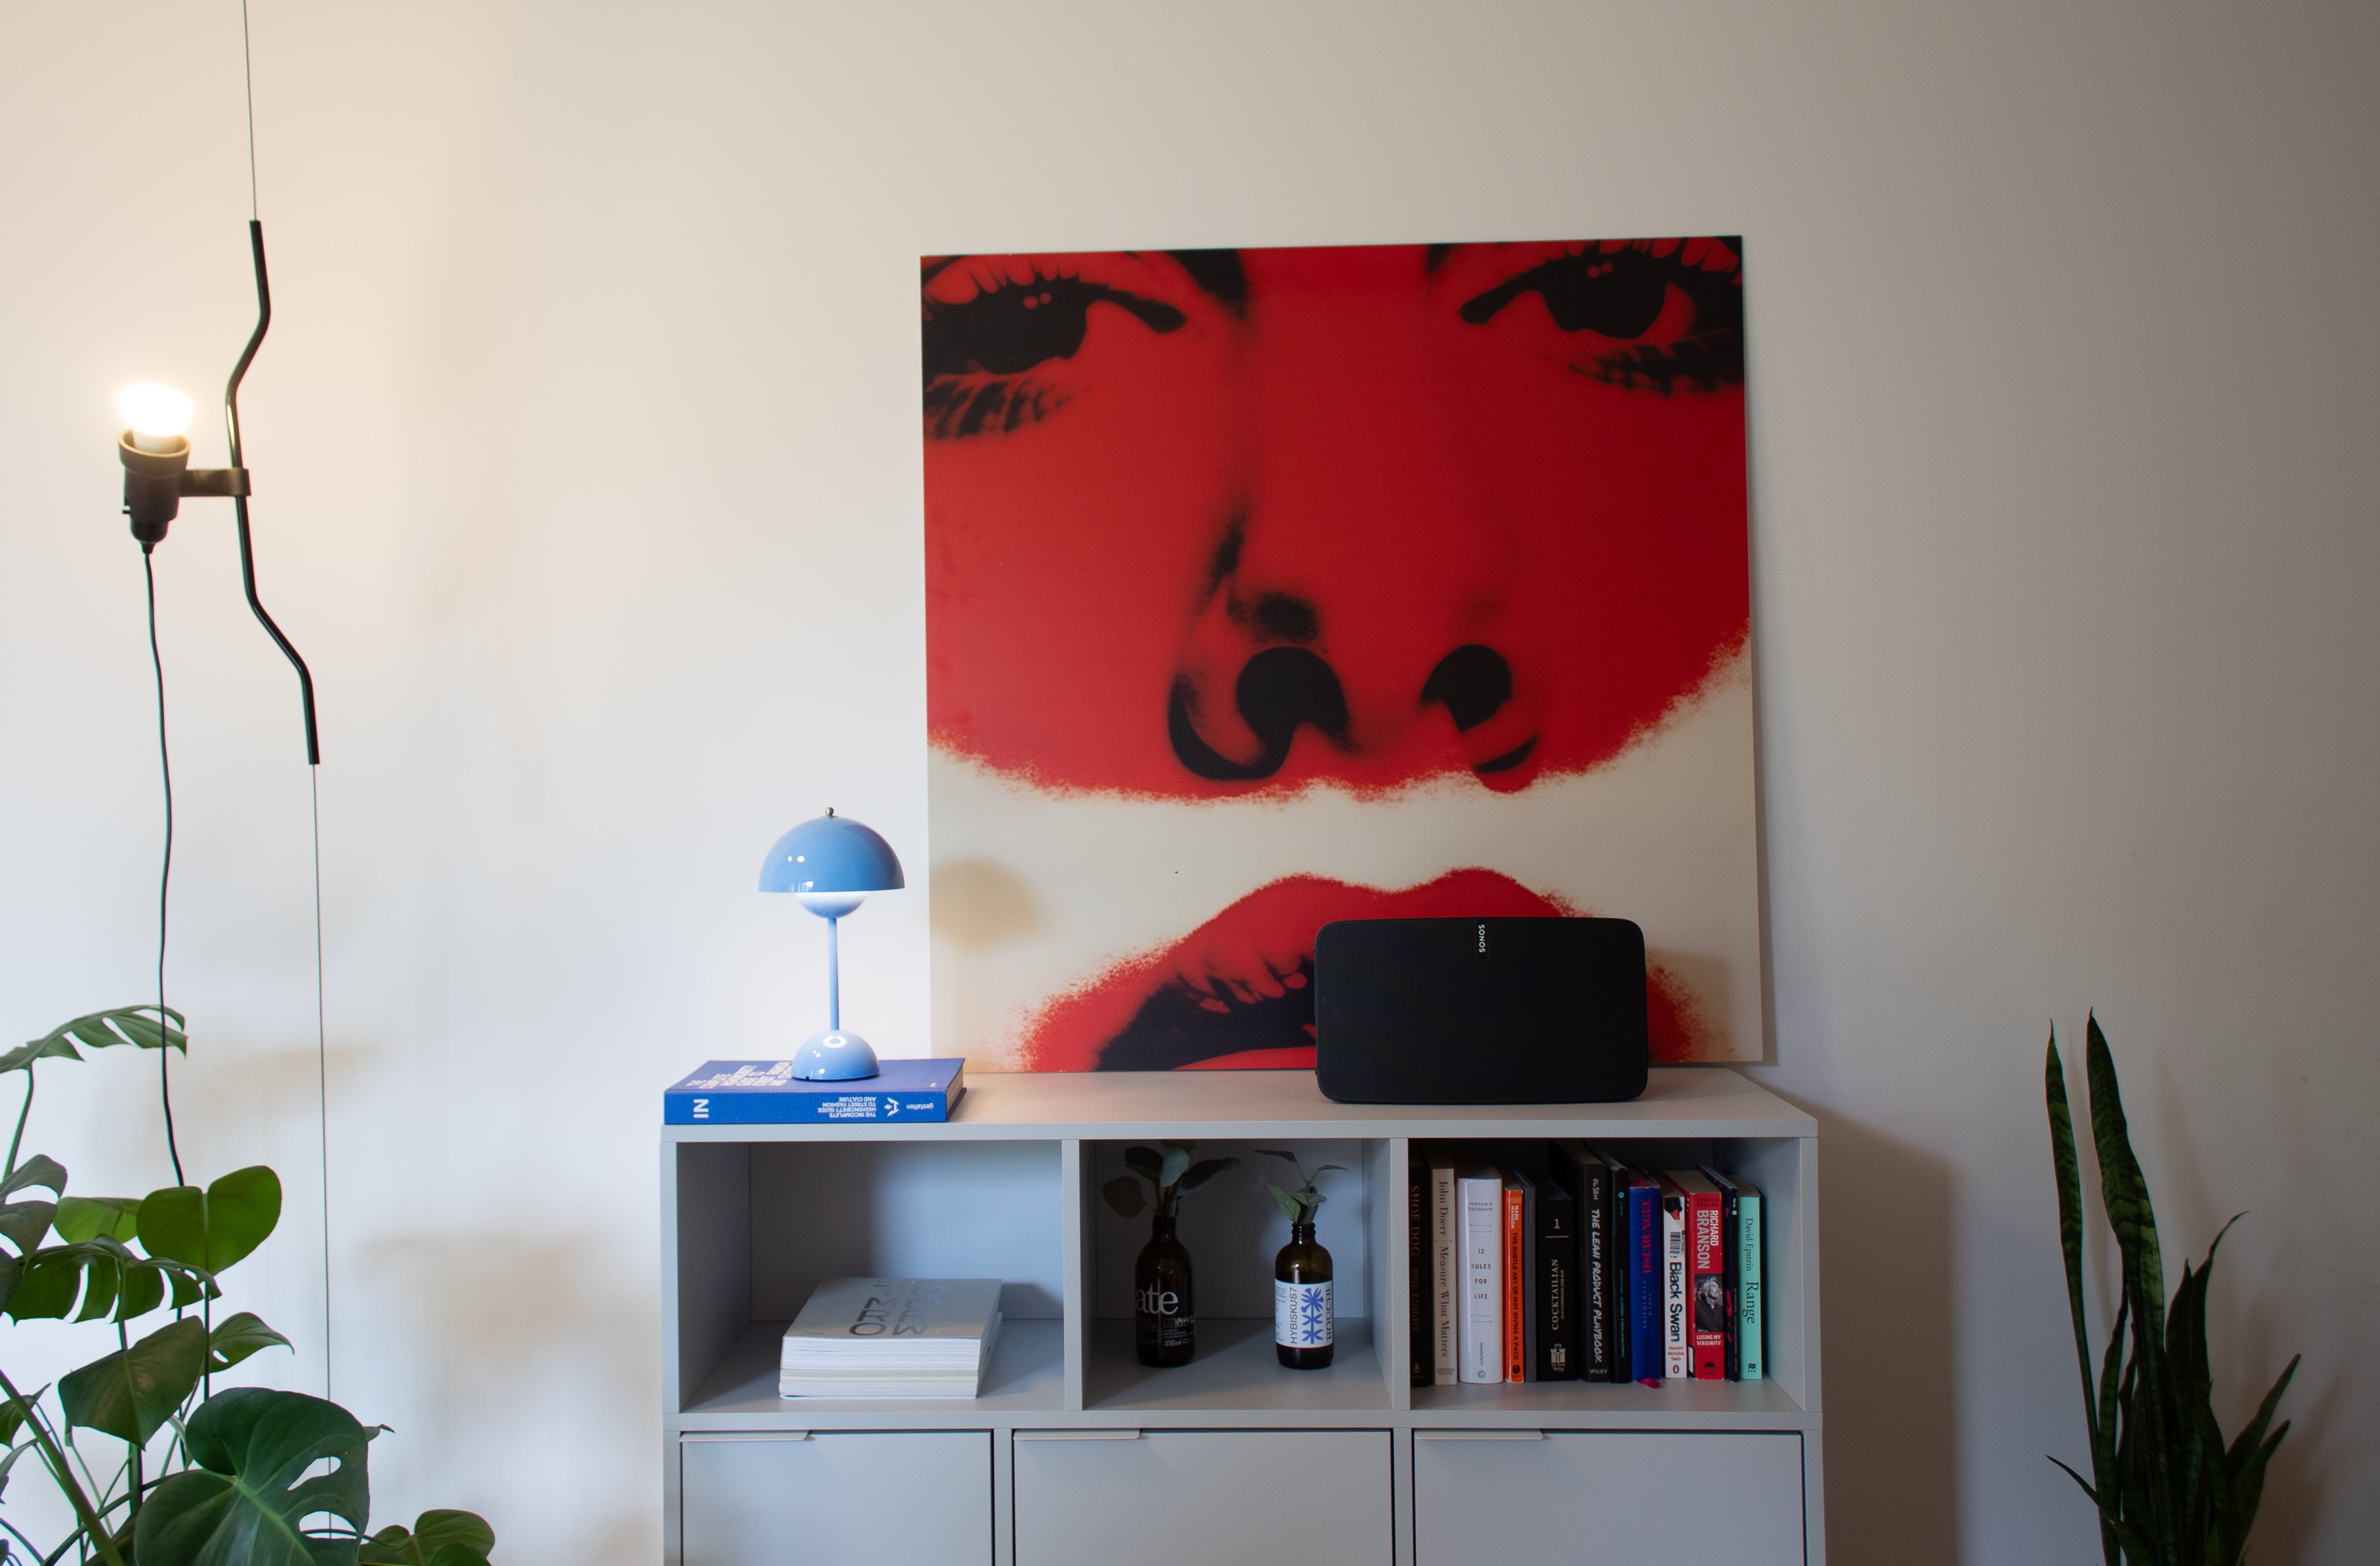 5 THINGS TO CONSIDER WHEN BUYING HIGH-QUALITY DECORATIVE ART